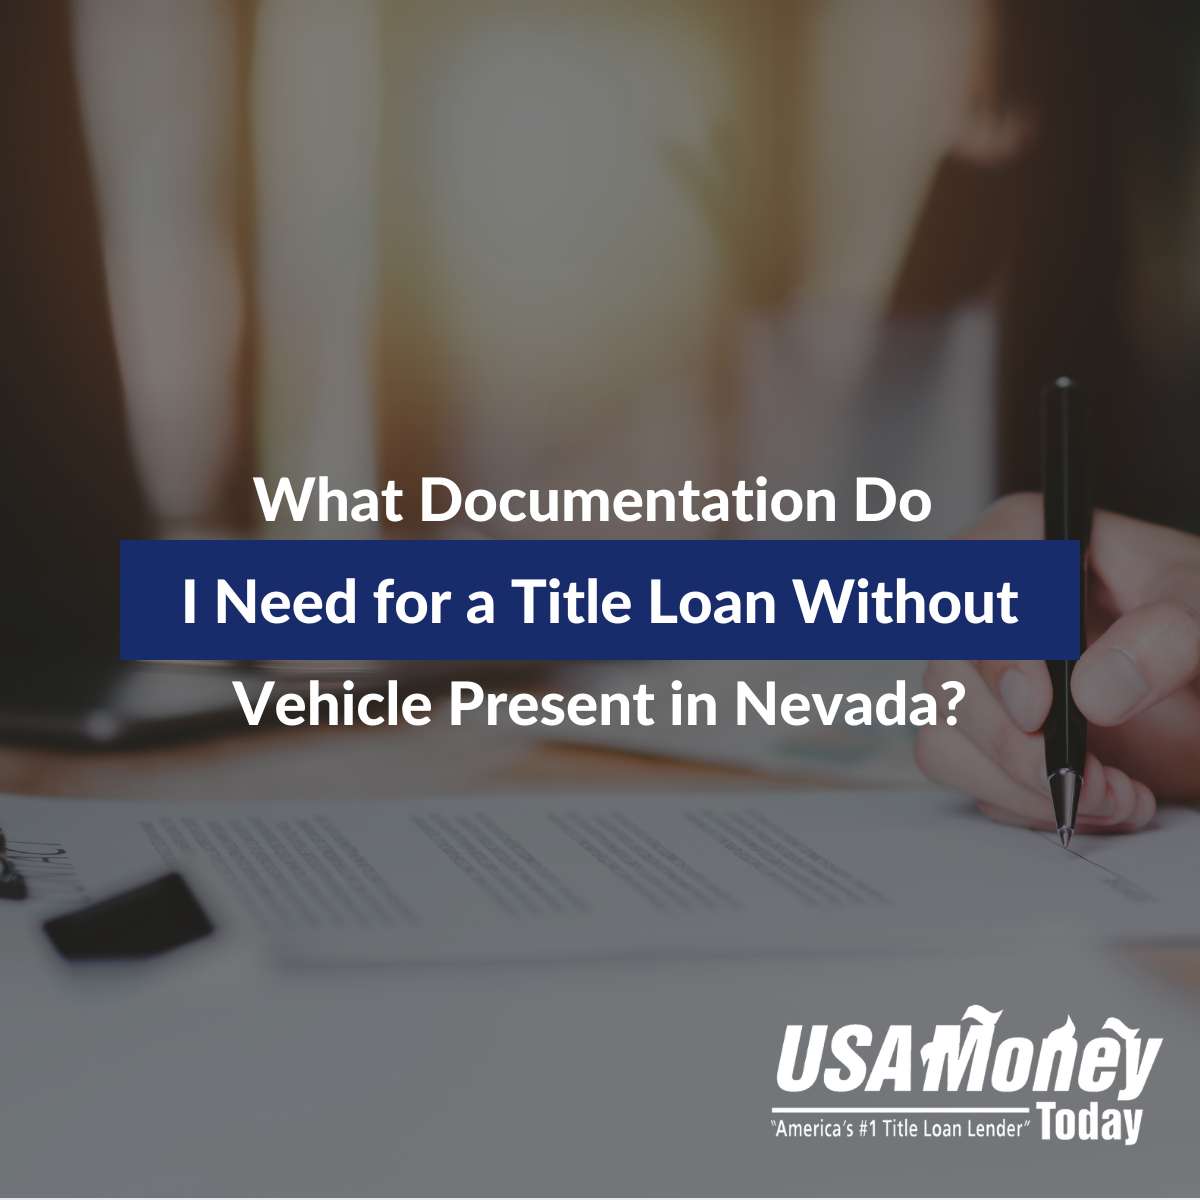 What Documentation Do I Need for a Title Loan Without Vehicle Present in Nevada?